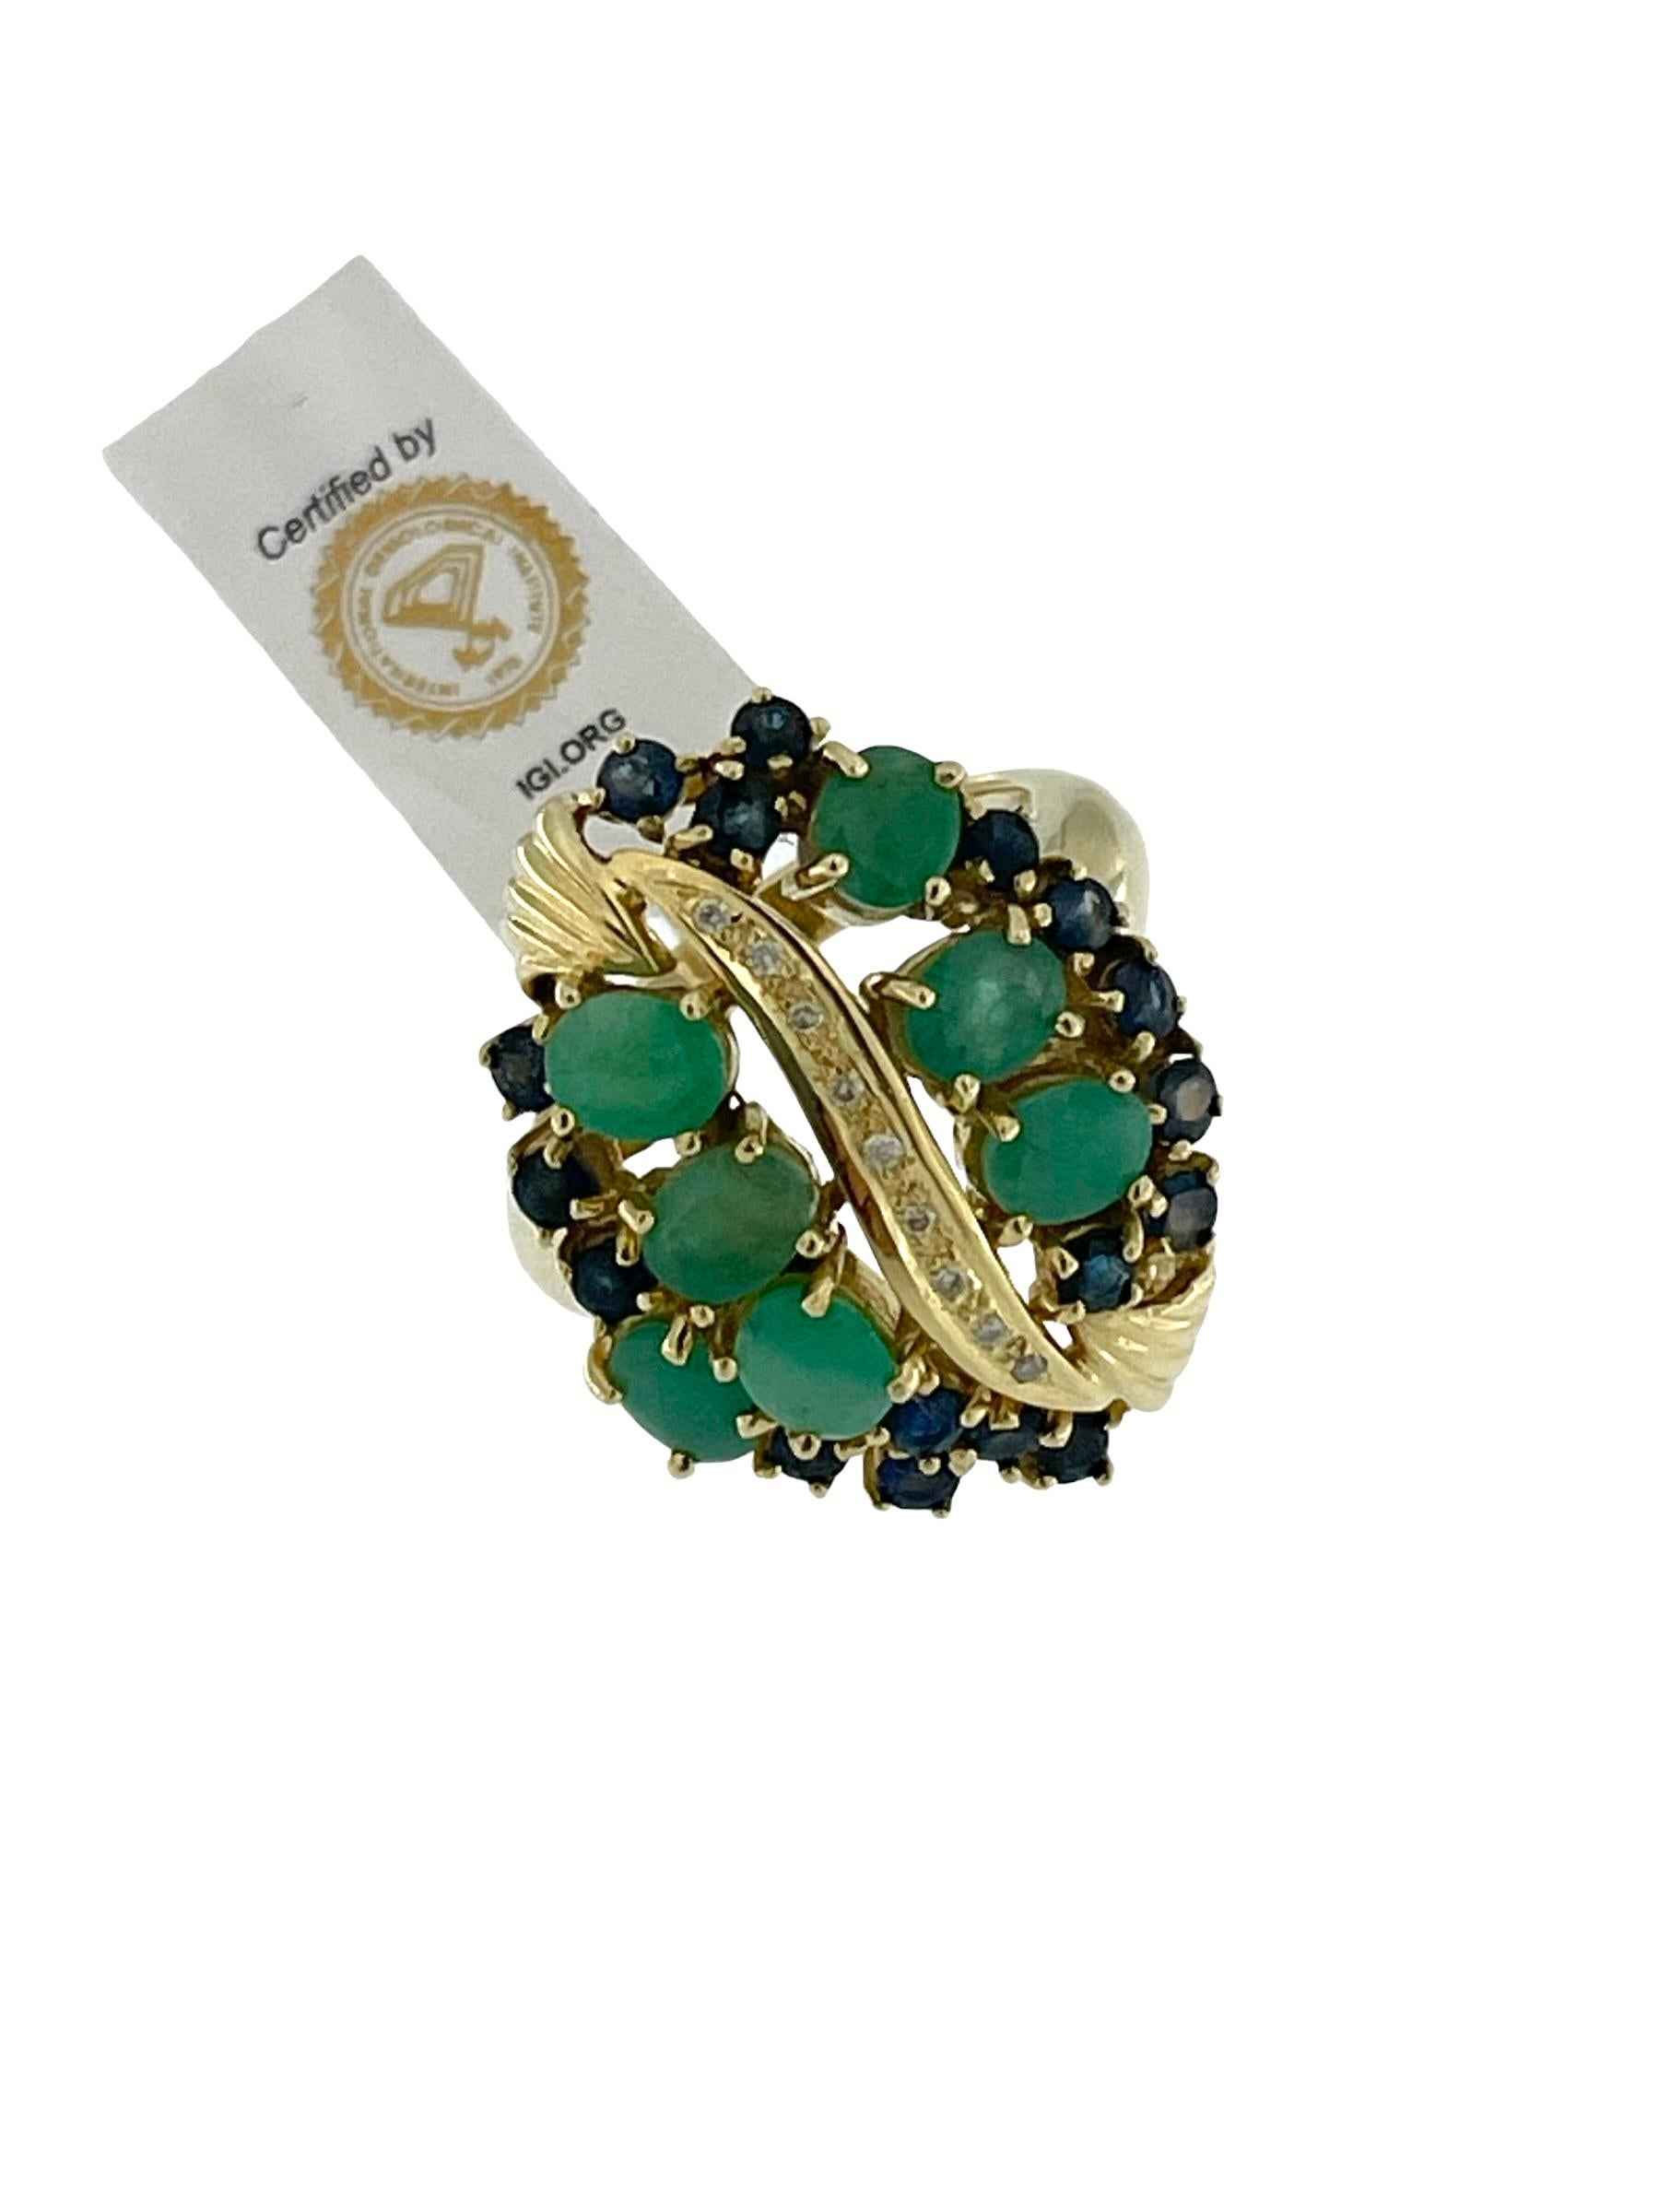 IGI Certified Yellow Gold Diamonds, Sapphires and Emeralds Cocktail Ring  For Sale 1